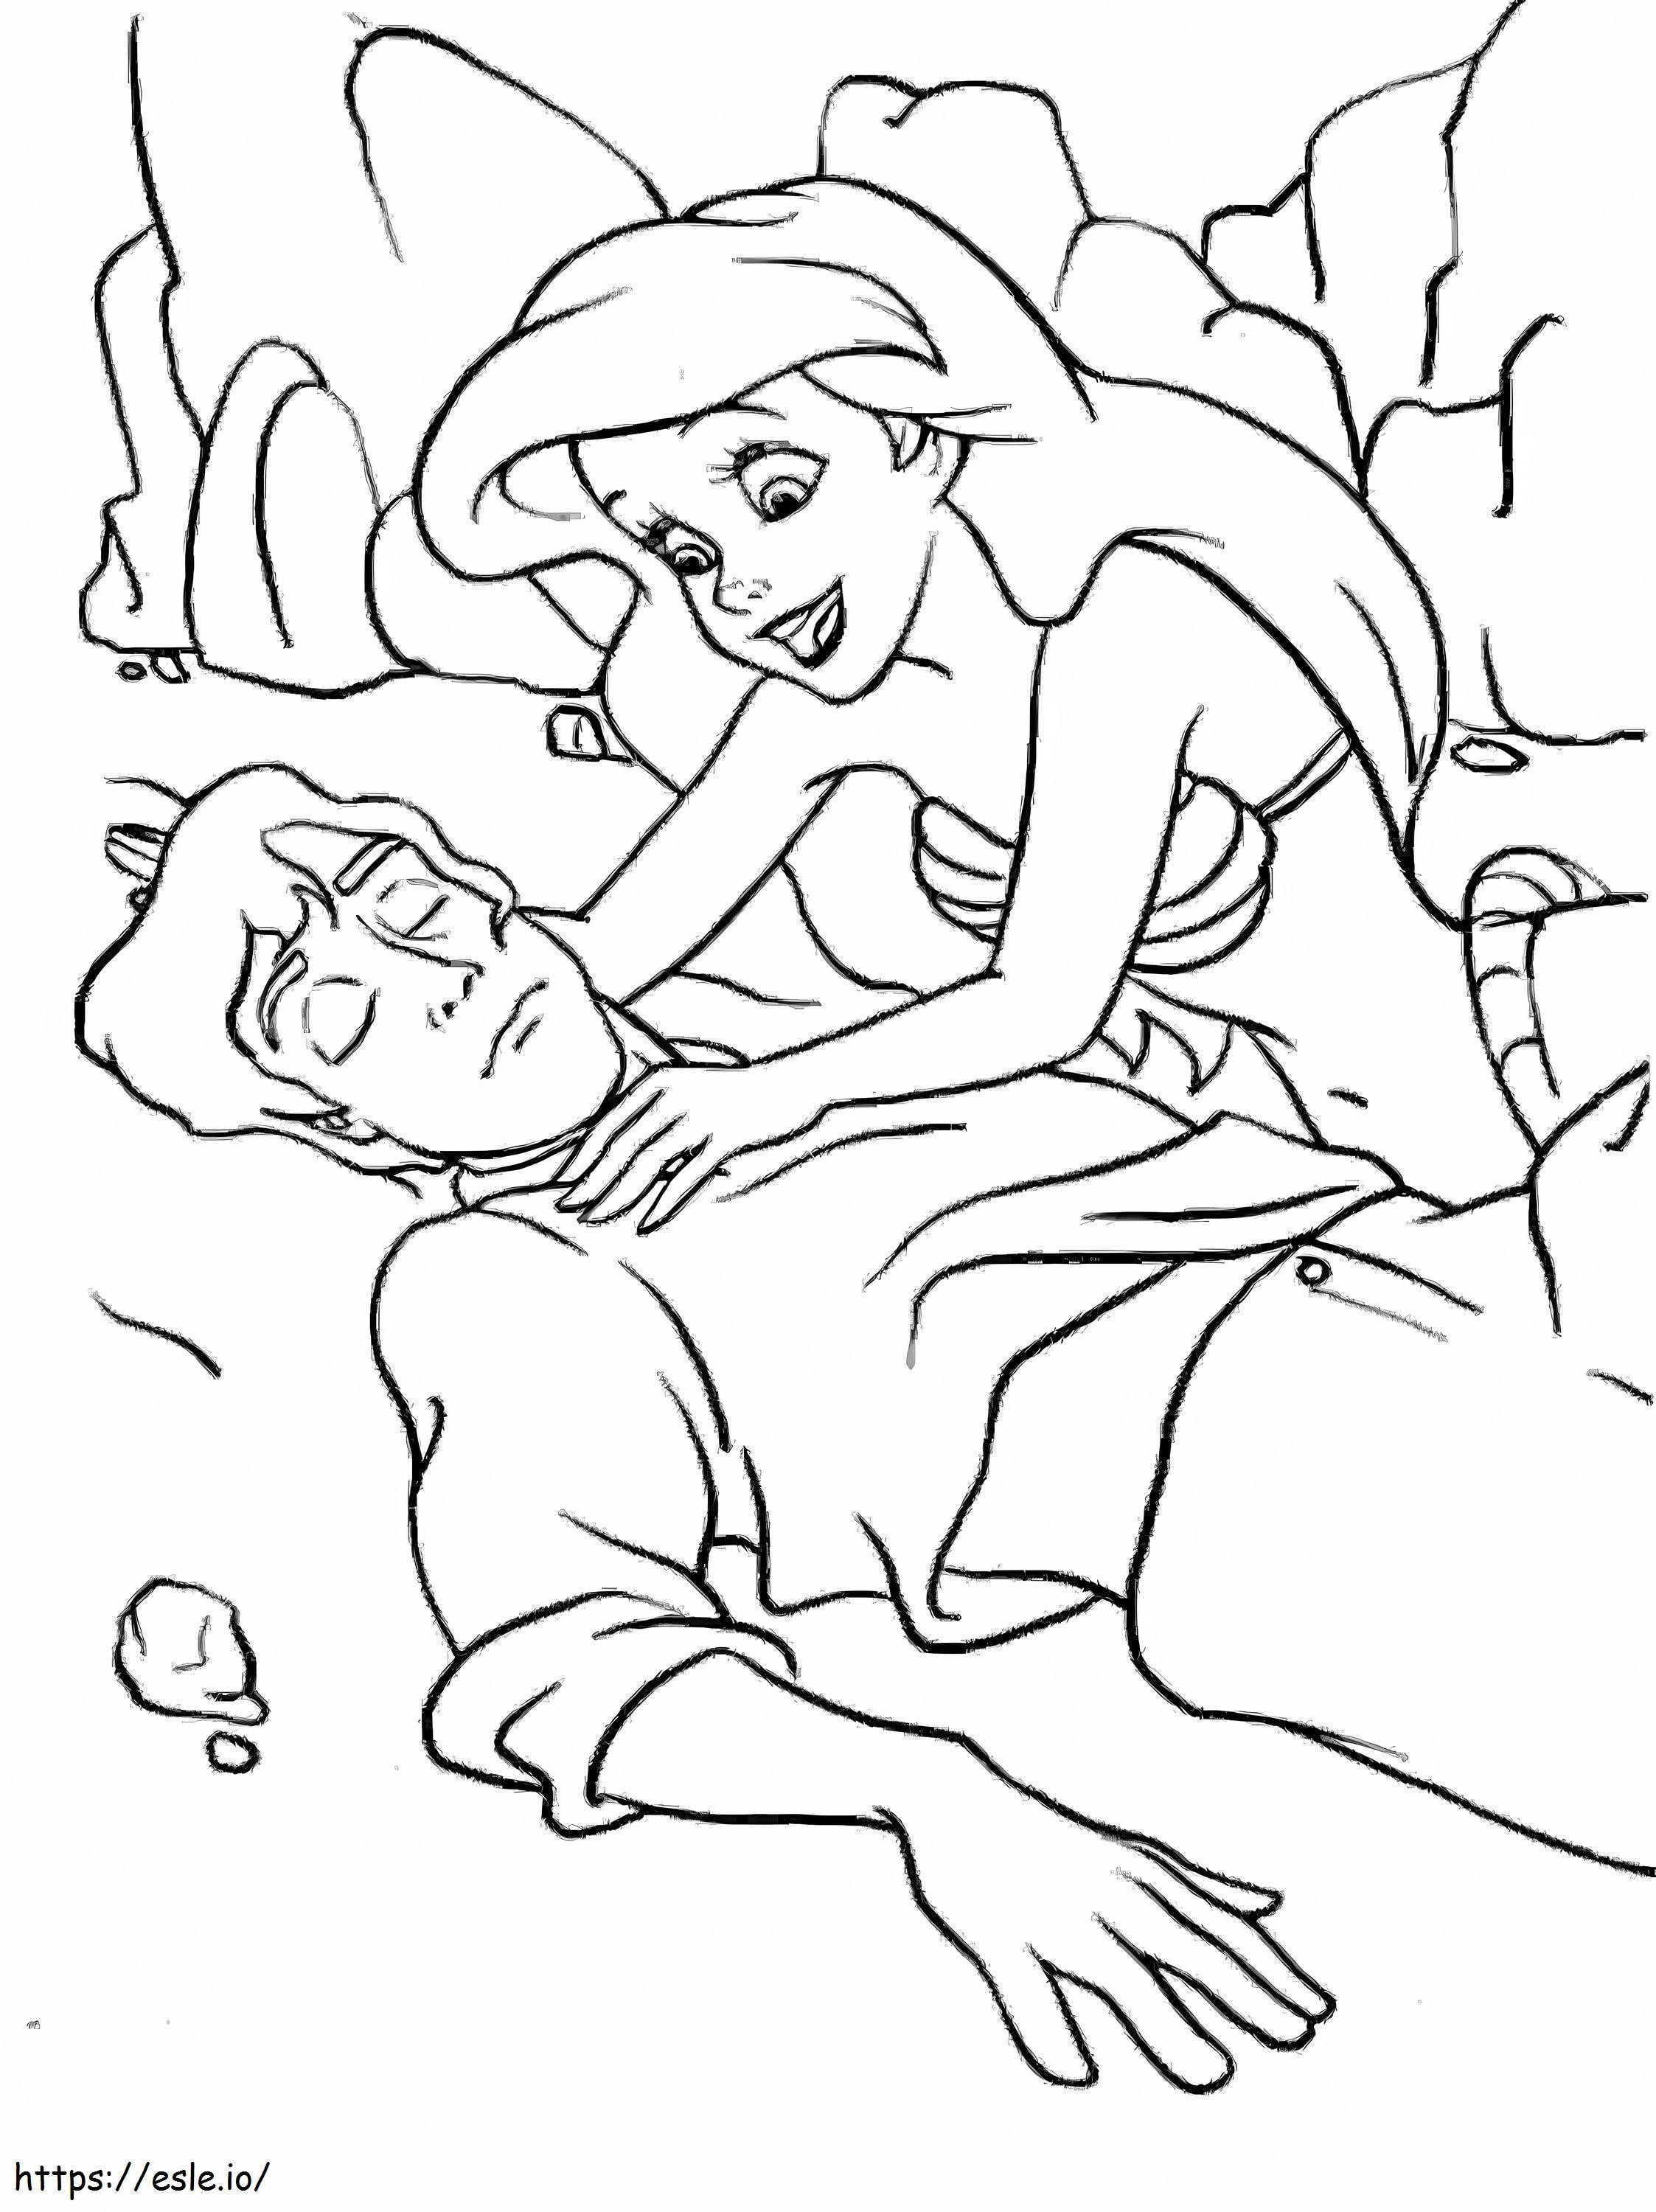 The Mermaid Ariel And Eric Are Fainting coloring page